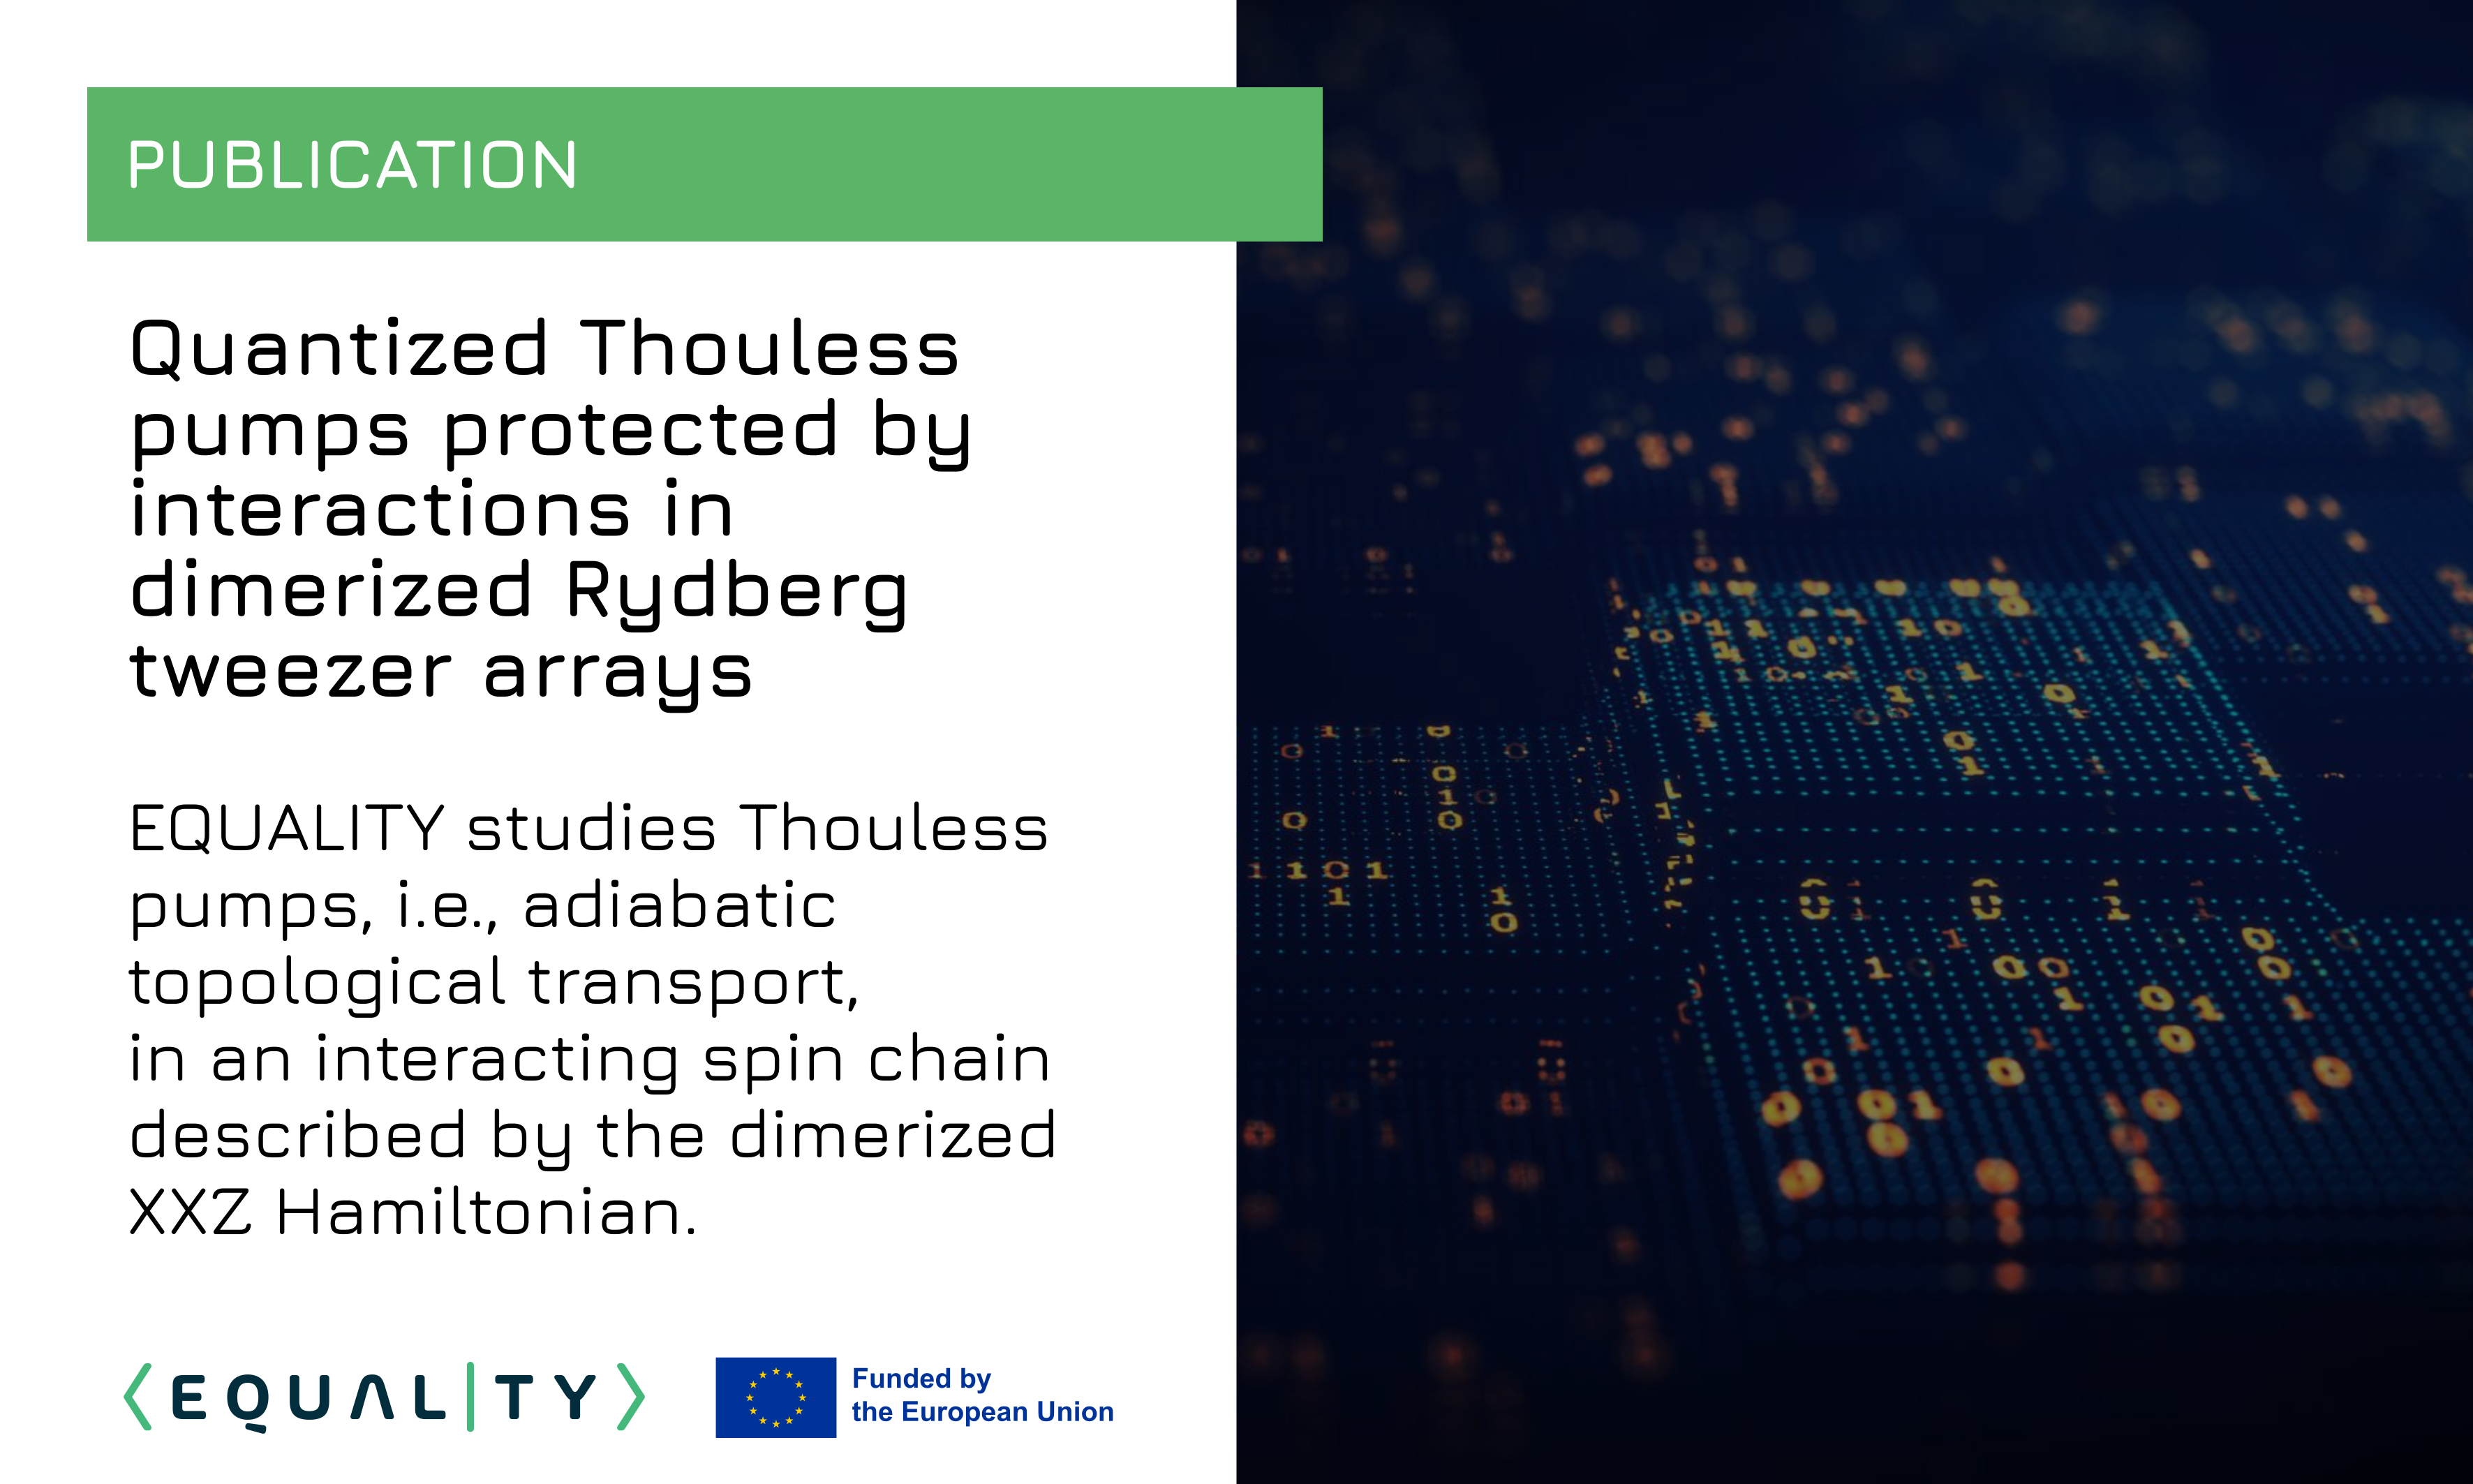 Publication: Quantized Thouless pumps protected by interactions in dimerized Rydberg tweezer arrays 